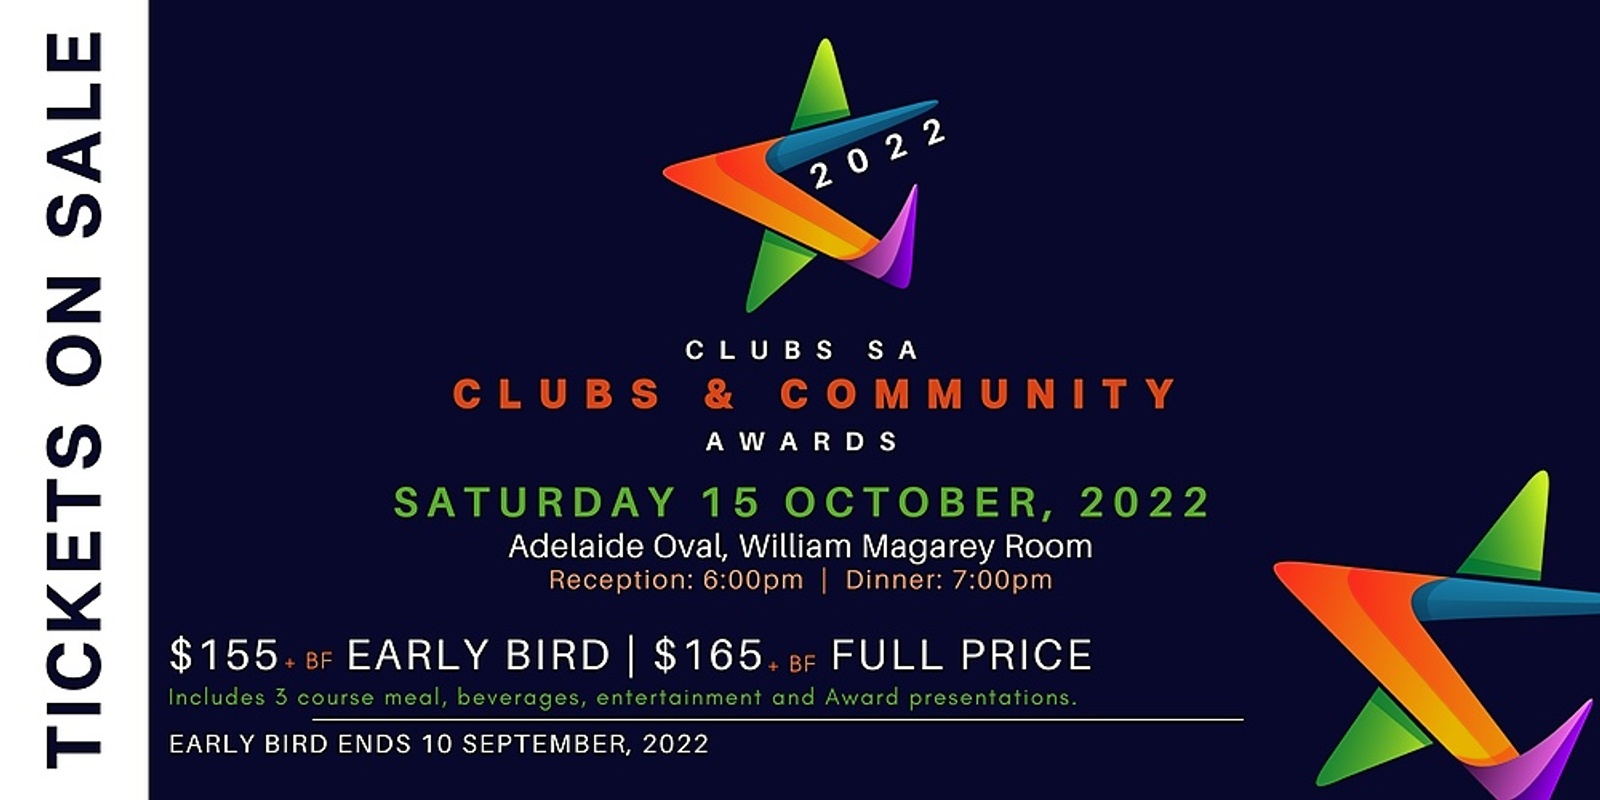 Banner image for Clubs SA 2022 Clubs & Community Awards